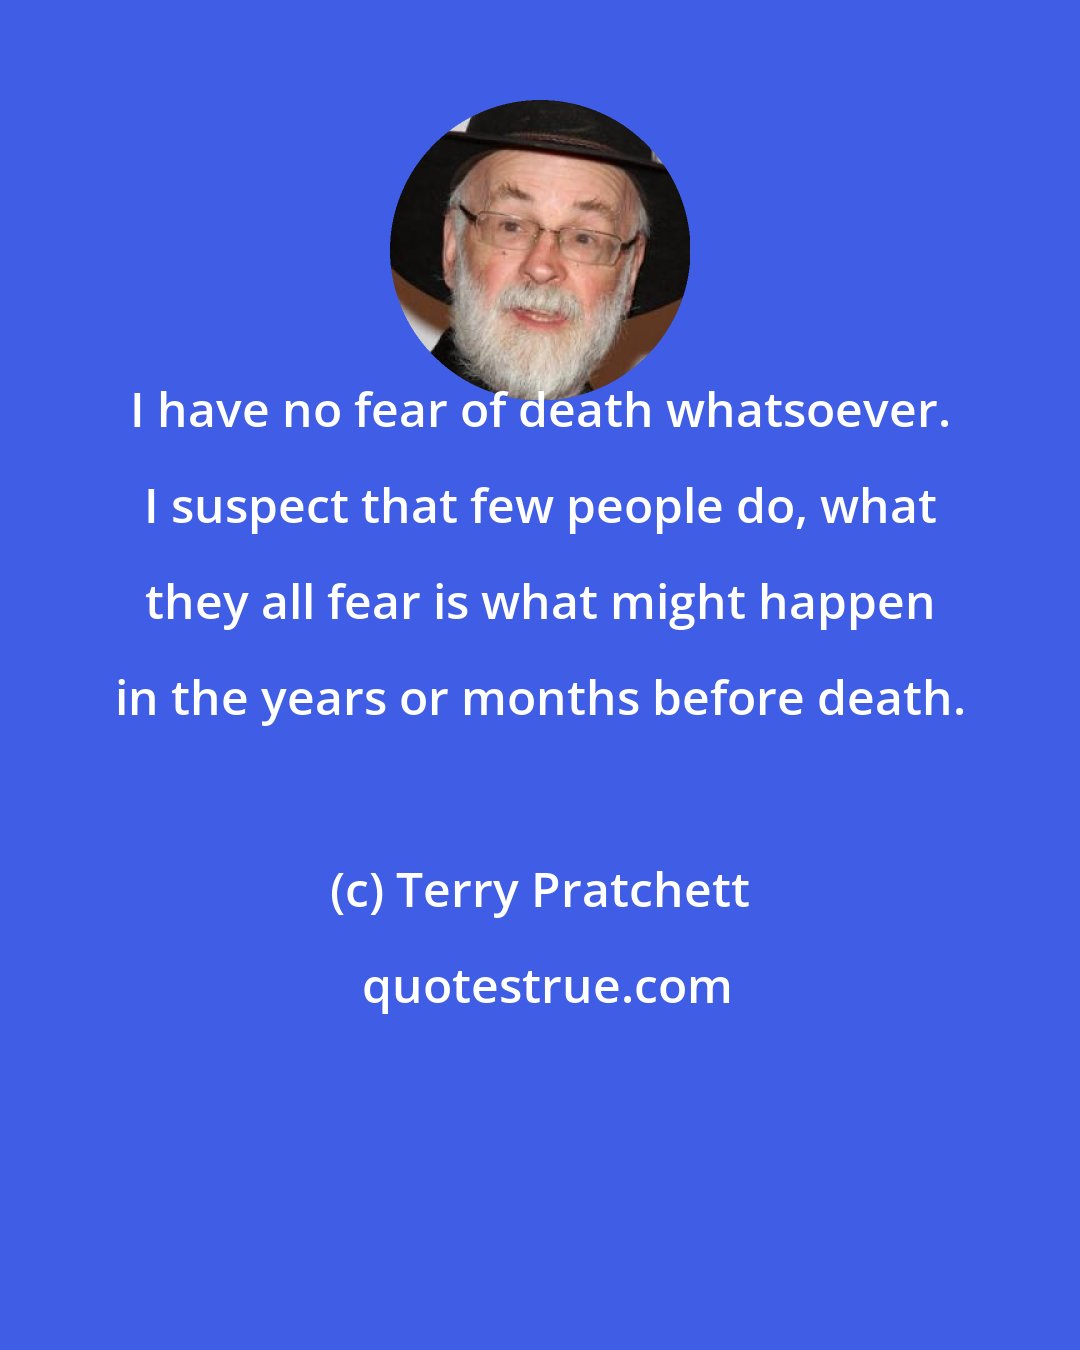 Terry Pratchett: I have no fear of death whatsoever. I suspect that few people do, what they all fear is what might happen in the years or months before death.